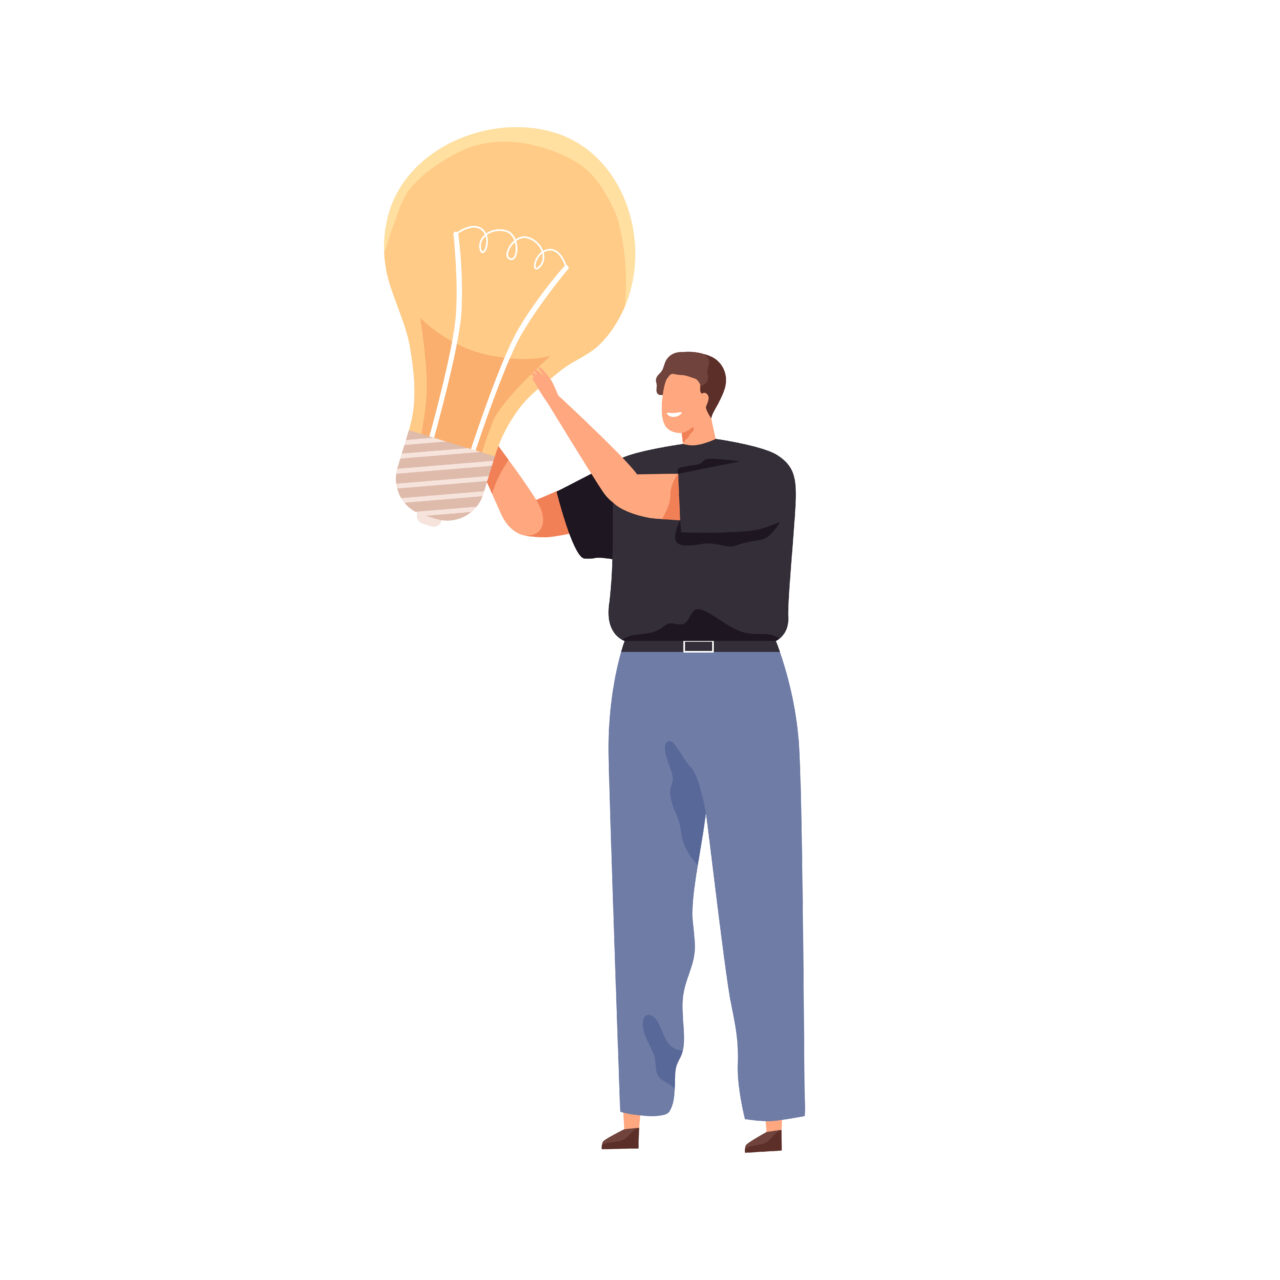 A man holds a bulb in his raised hands. 